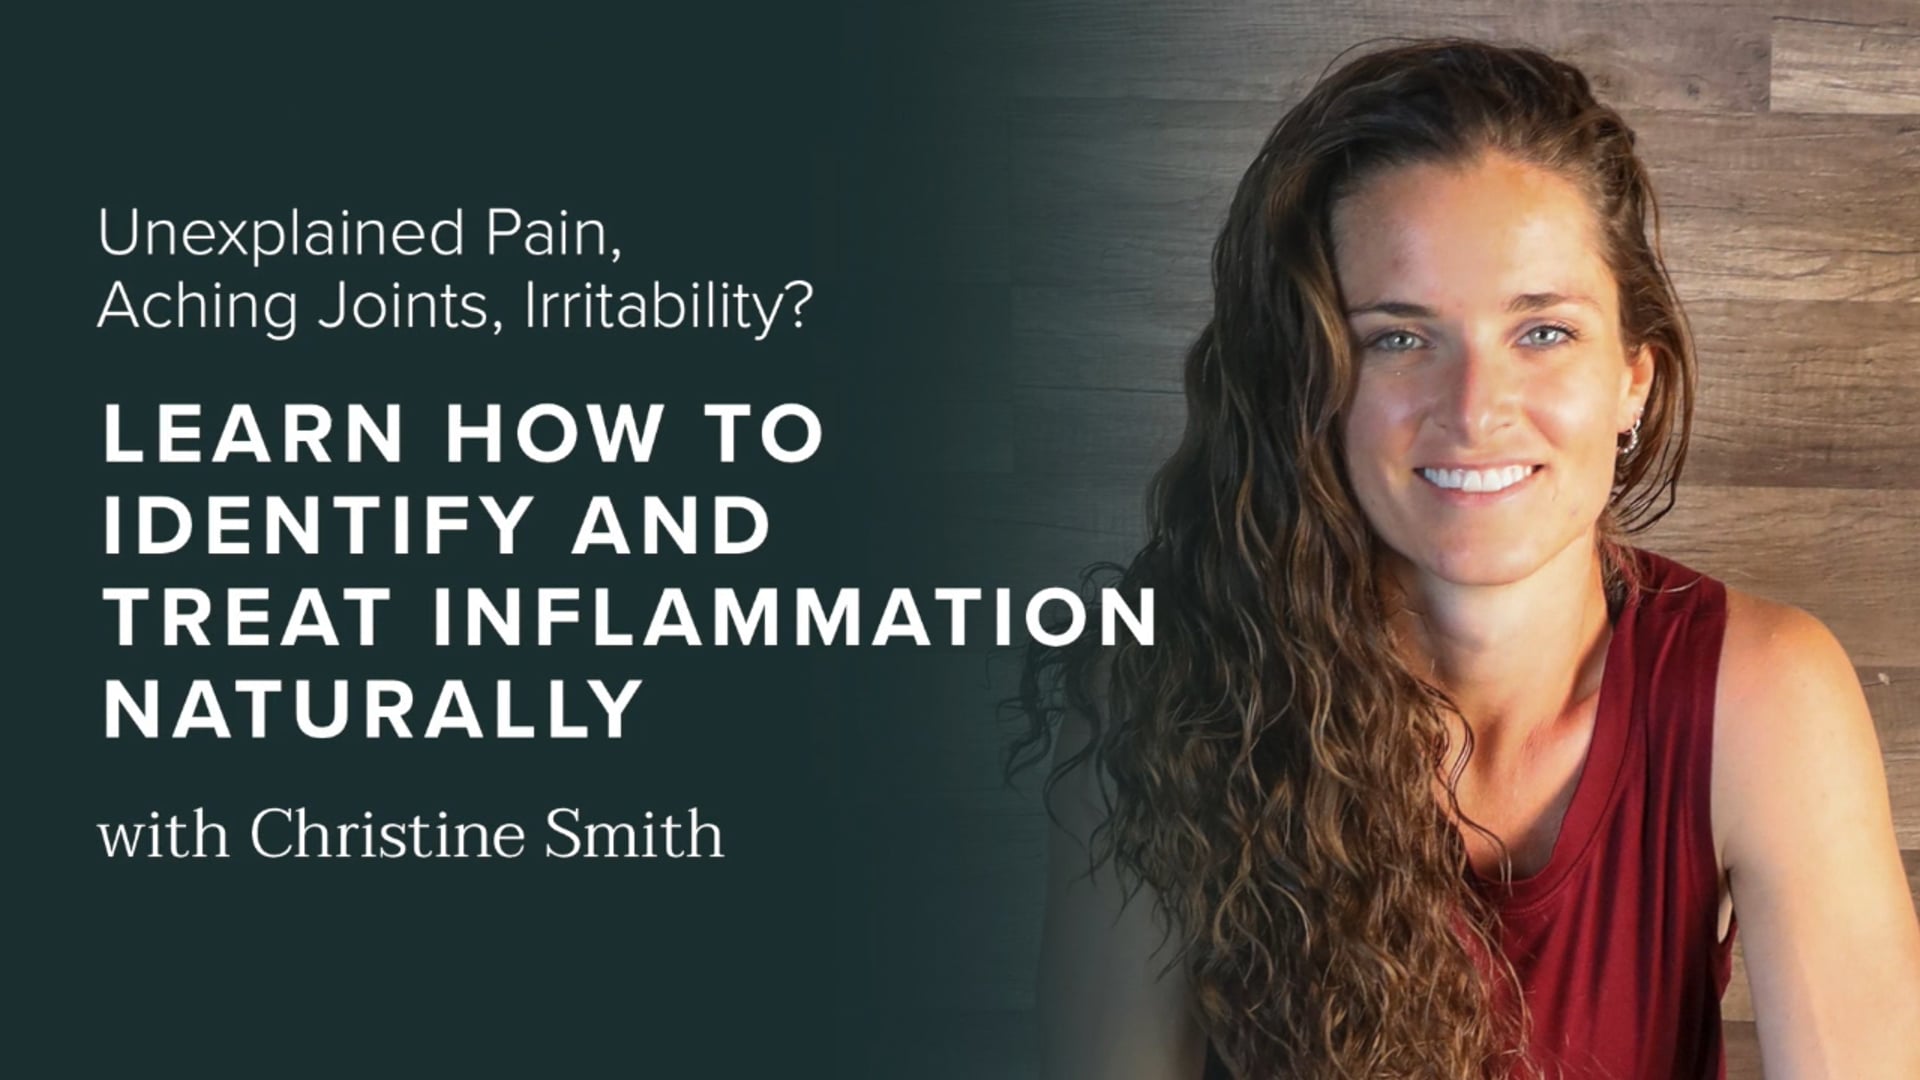 Learn How to Identify and Treat Inflammation Naturally